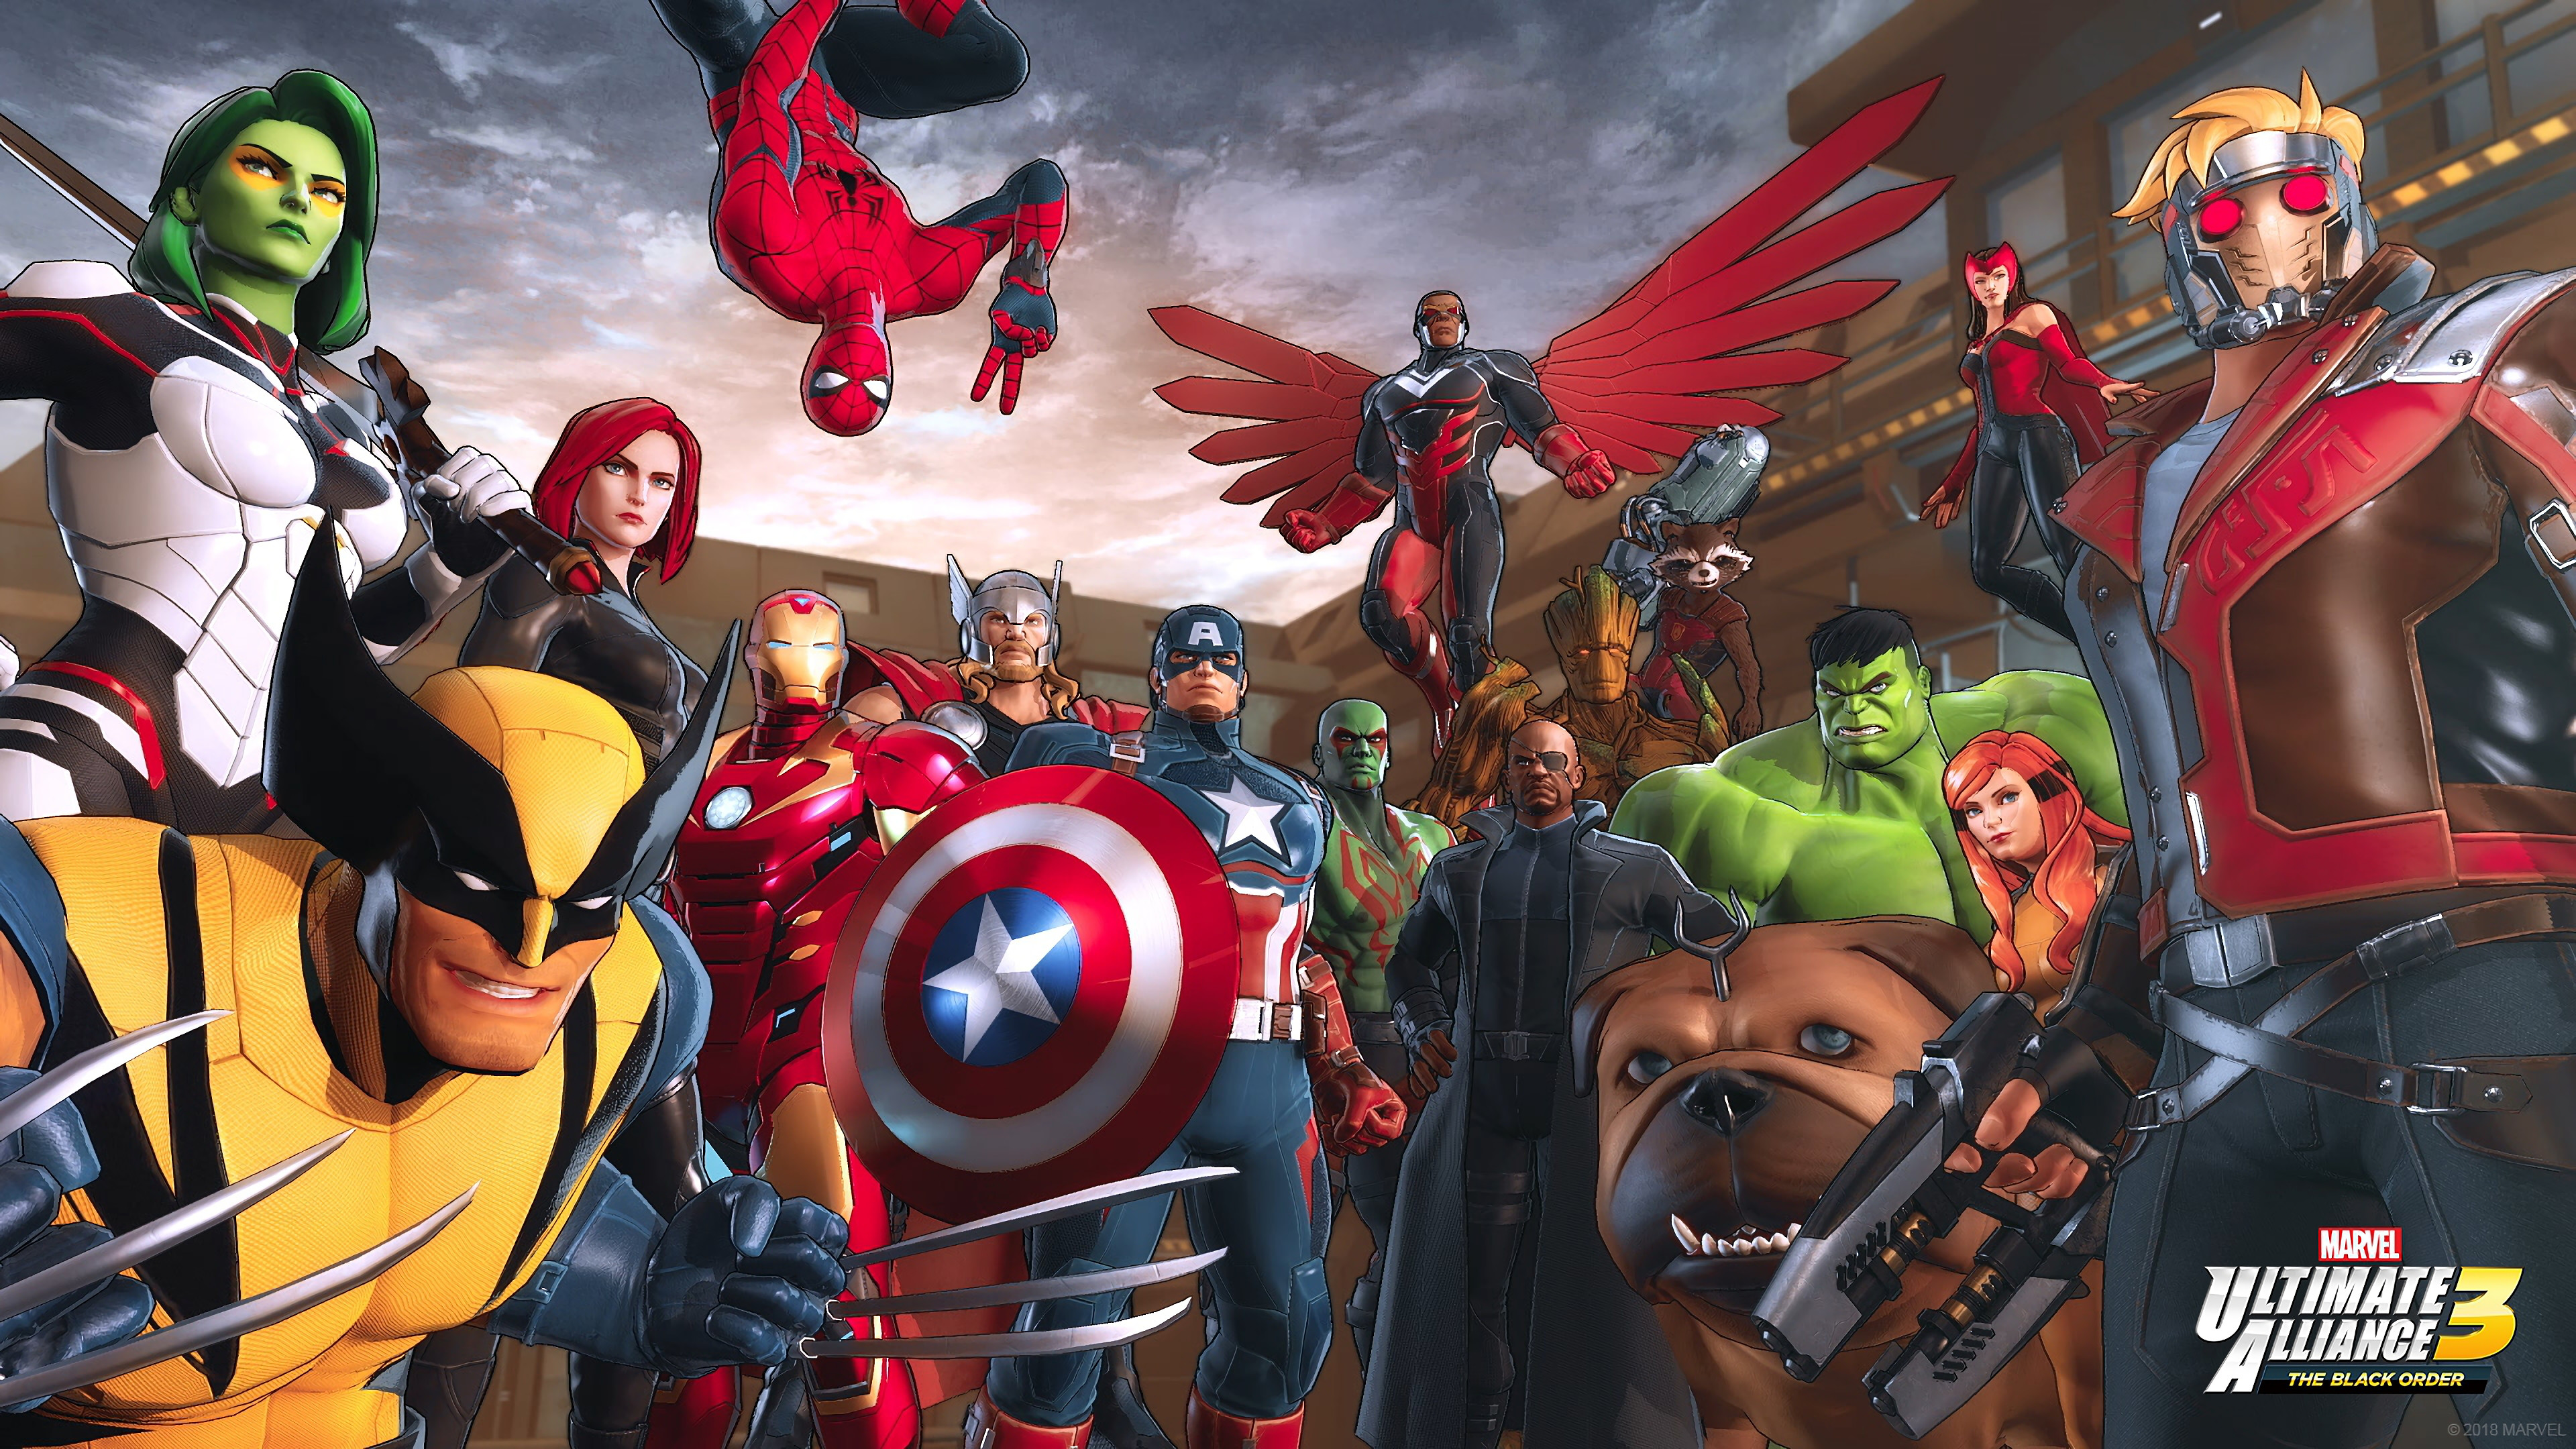 thor, video game, marvel ultimate alliance 3: the black order, black widow, captain america, drax the destroyer, falcon (marvel comics), gamora, groot, hulk, iron man, lockjaw (marvel comics), nick fury, peter quill, rocket raccoon, scarlet witch, spider man, star lord, wolverine